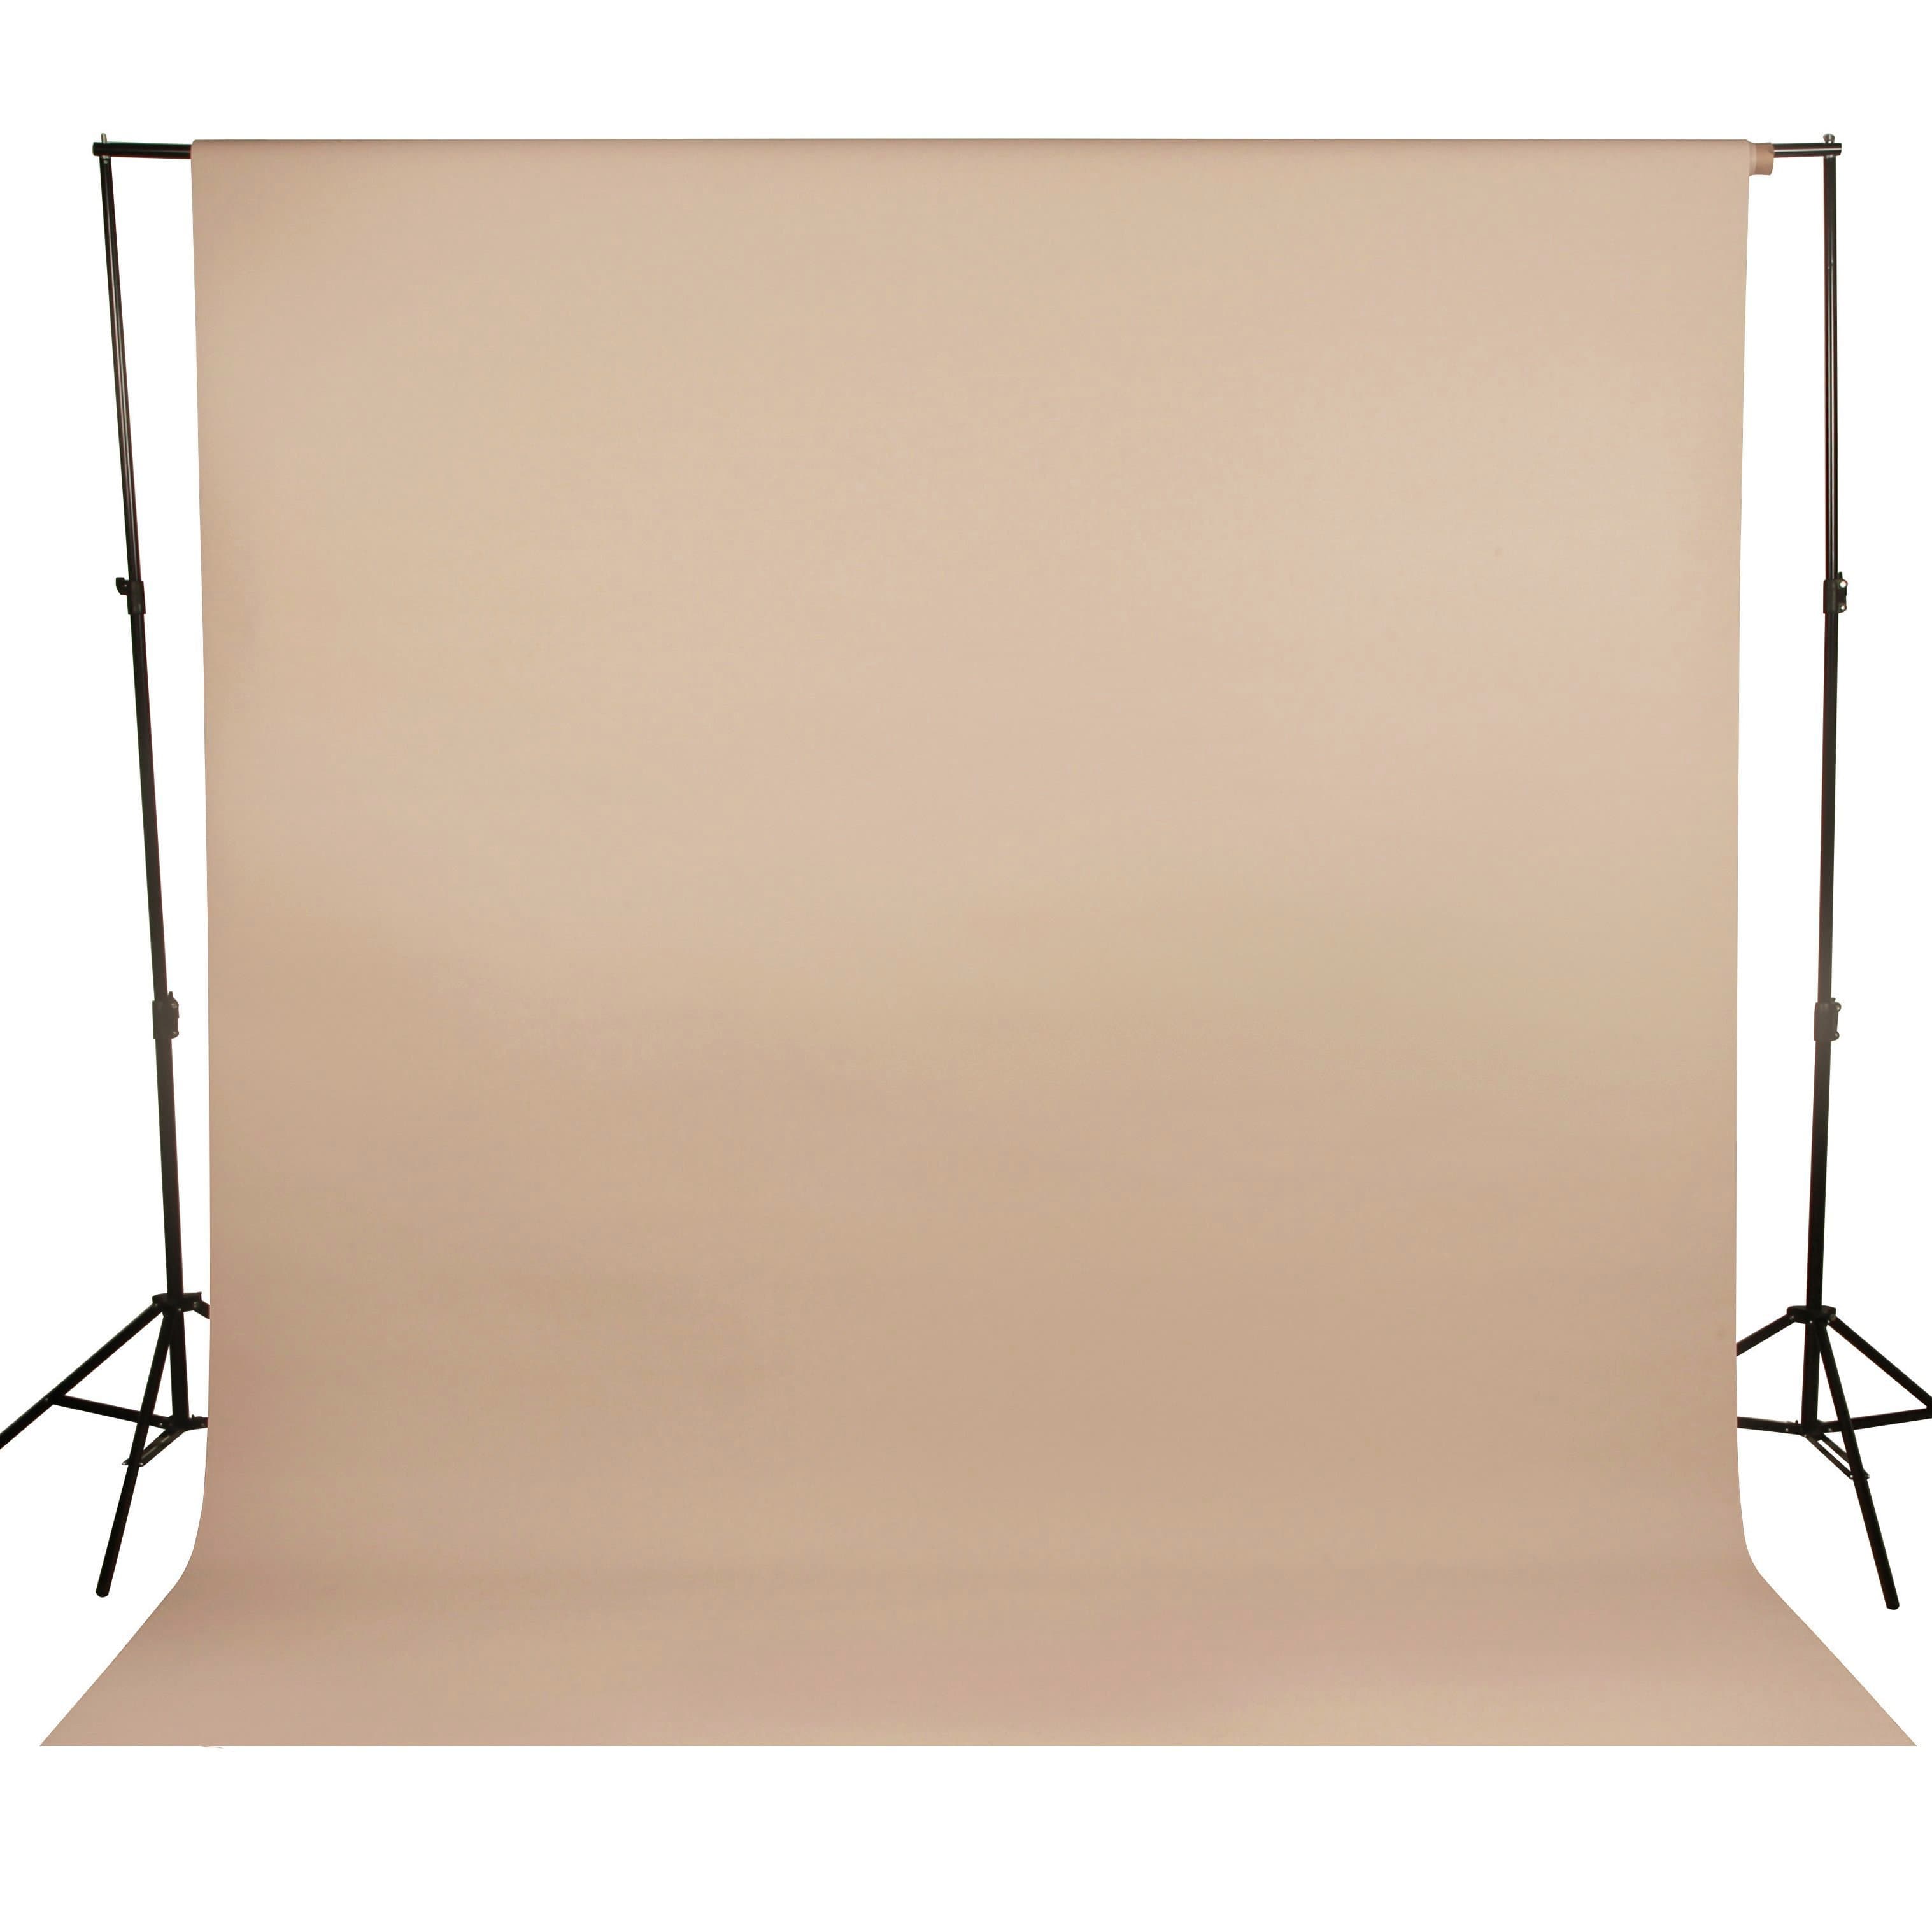 Paper Roll Photography Studio Backdrop Full Length (2.7 x 10M) - Moroccan Clay Brown